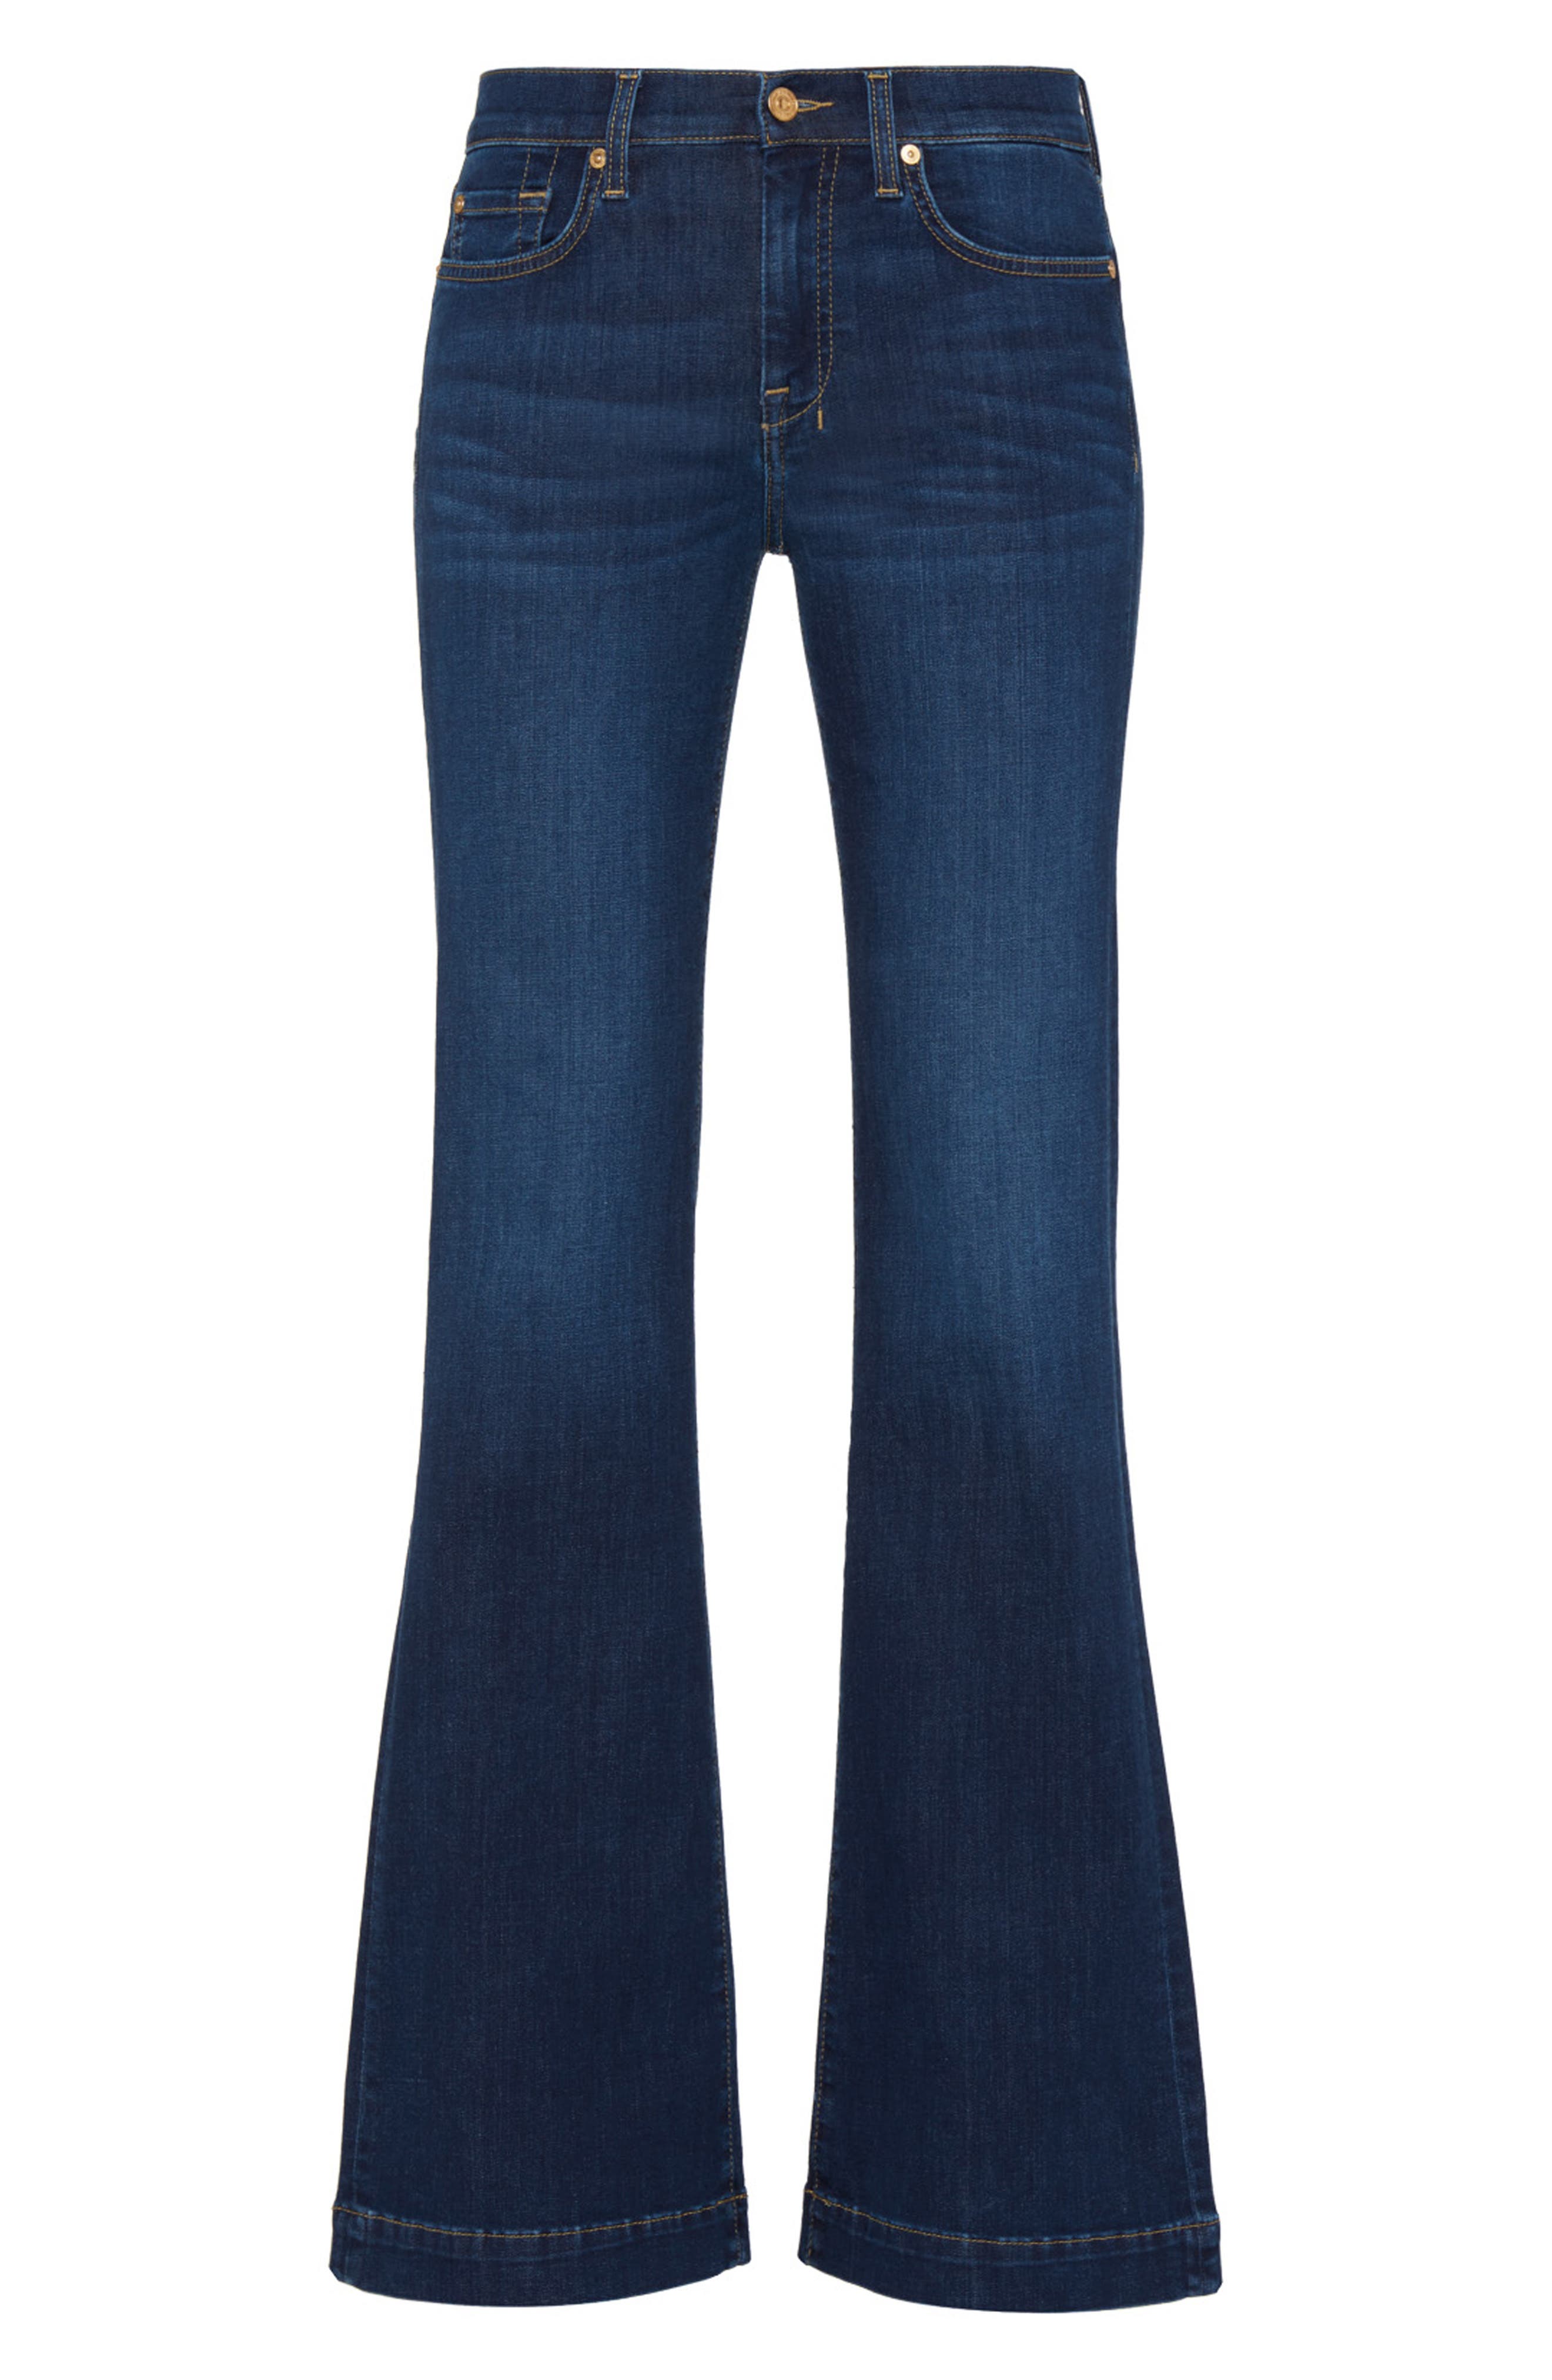 Damen Kleidung 7 For All Mankind Damen Jeans 7 For All Mankind Damen Straight-Cut Jeans  7 For All Mankind Damen Straight-Cut Jeans  7 For All Mankind Damen schwarz T 42 Straight-Cut Jeans 7 FOR ALL MANKIND W32 